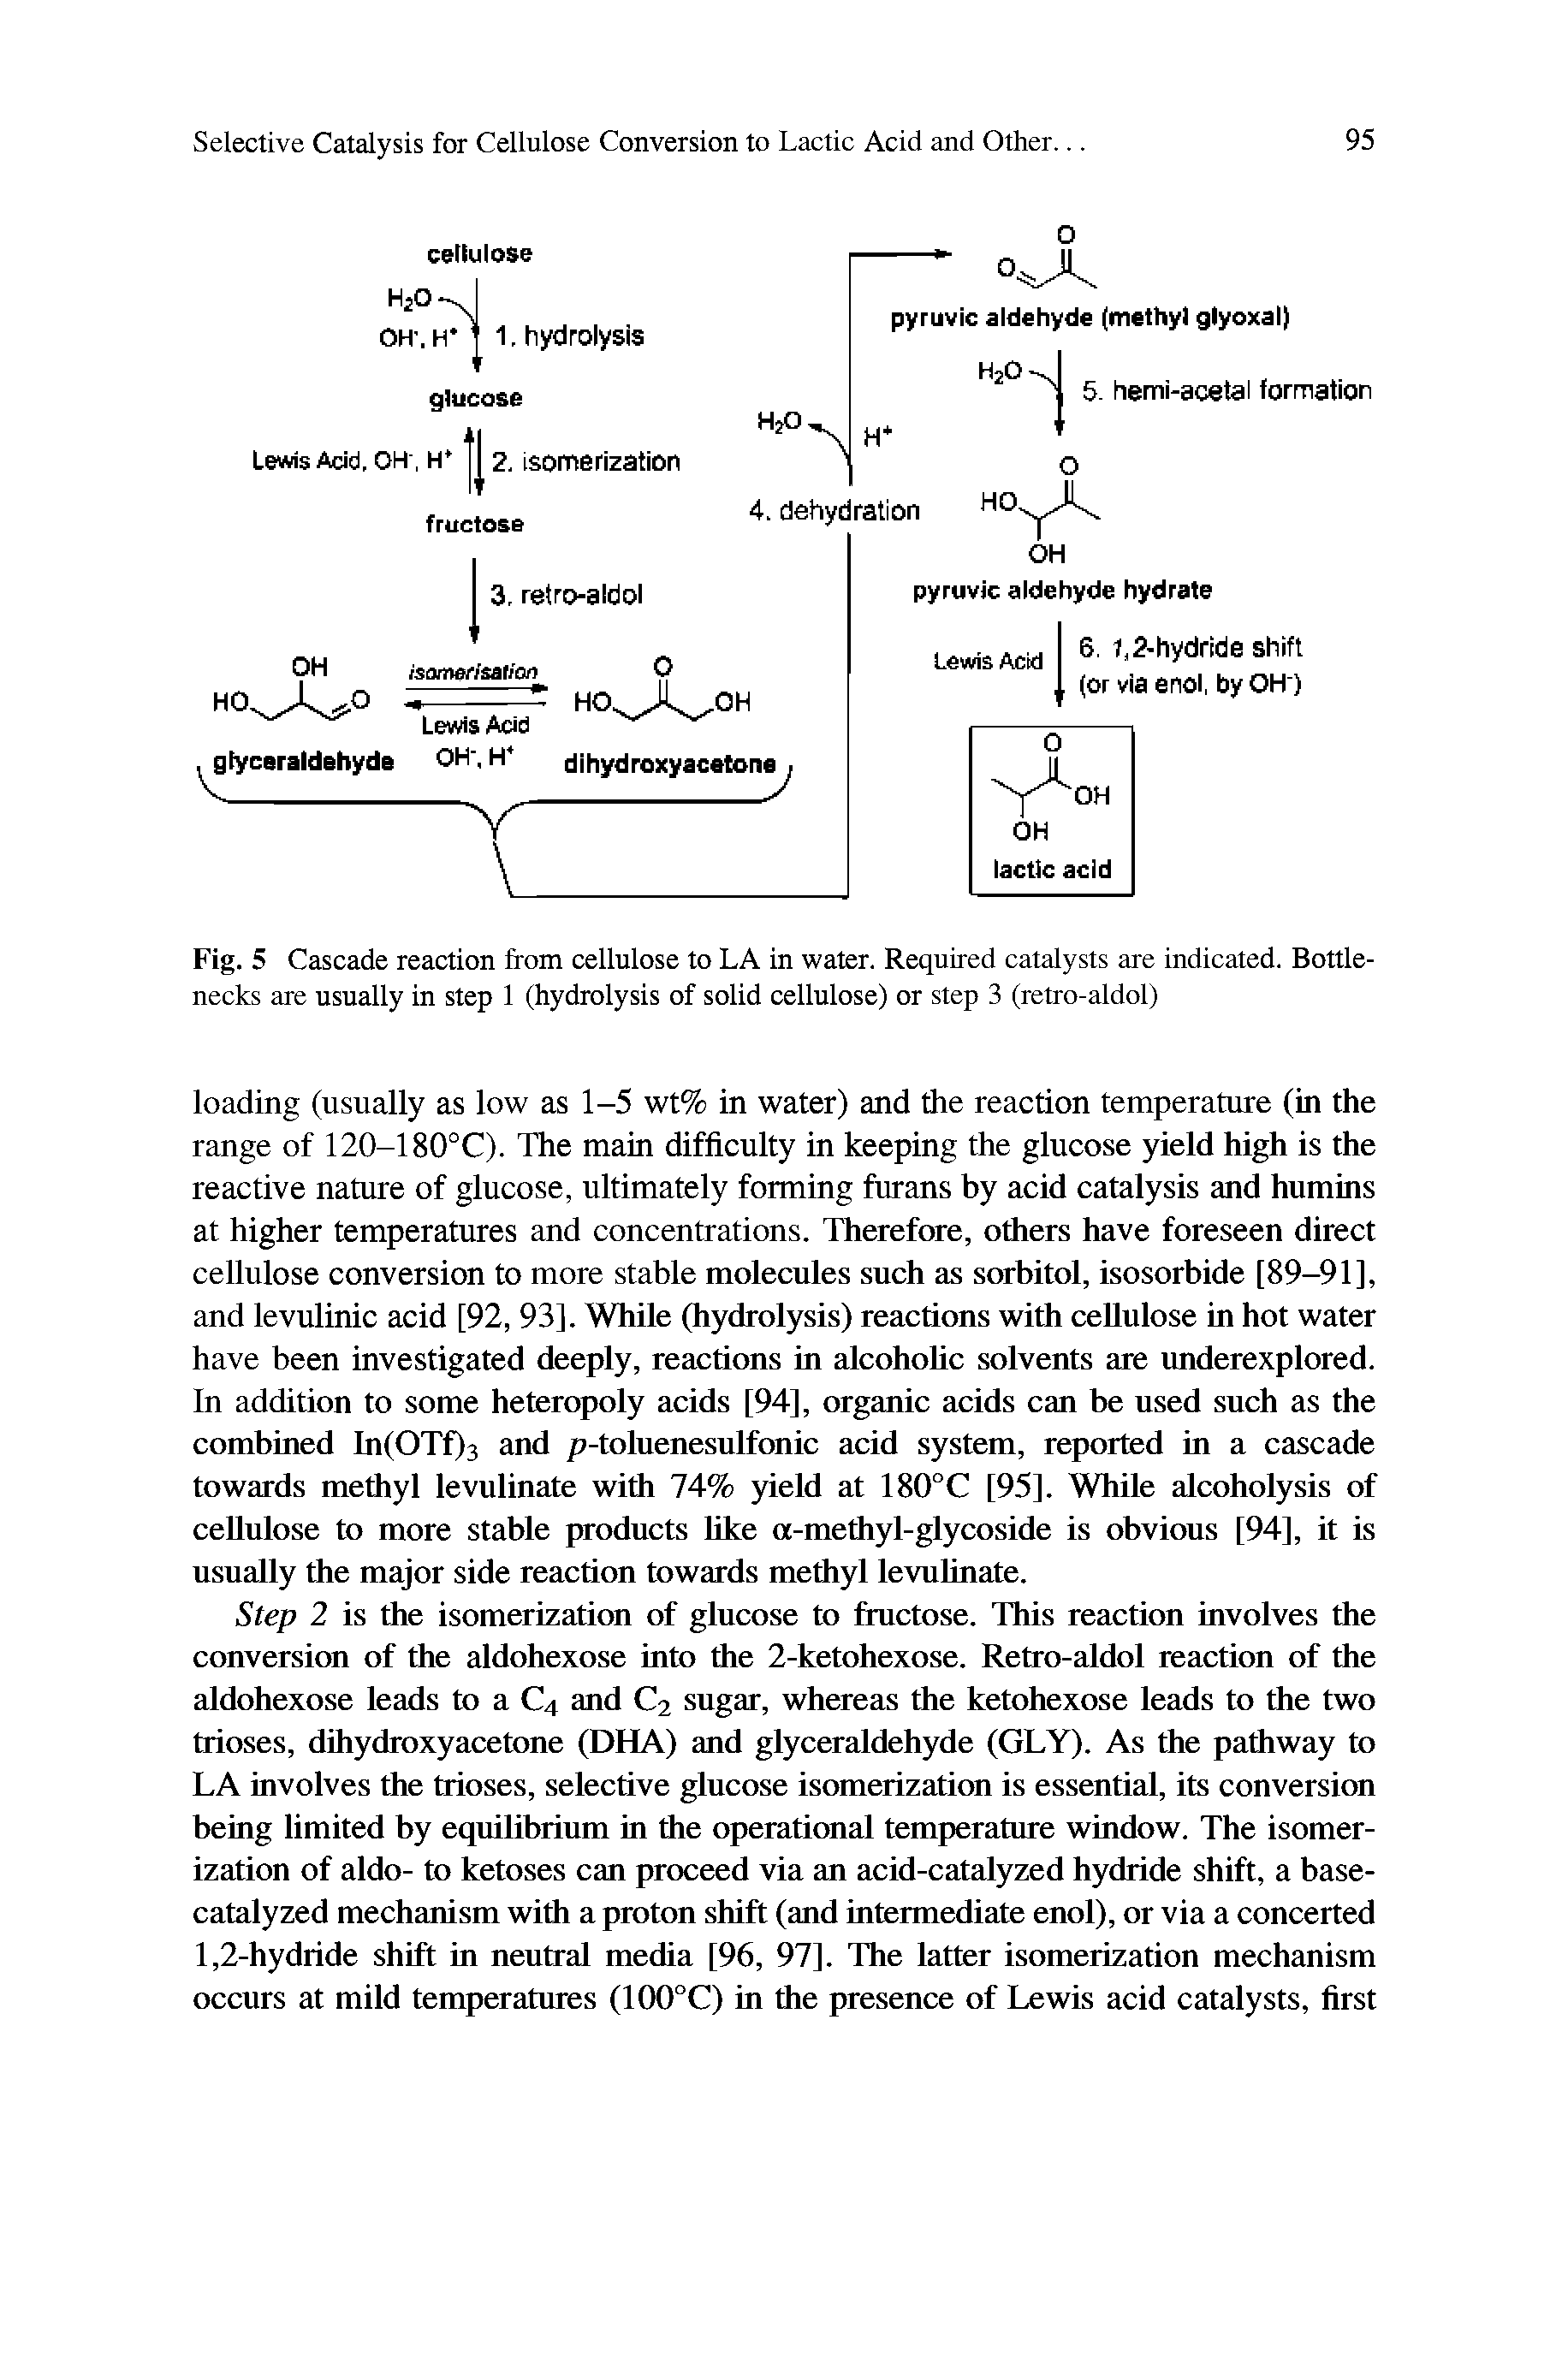 Fig. 5 Cascade reaction from cellulose to LA in water. Required catalysts are indicated. Bottlenecks are usually in step 1 (hydrolysis of solid cellulose) or step 3 (retro-aldol)...